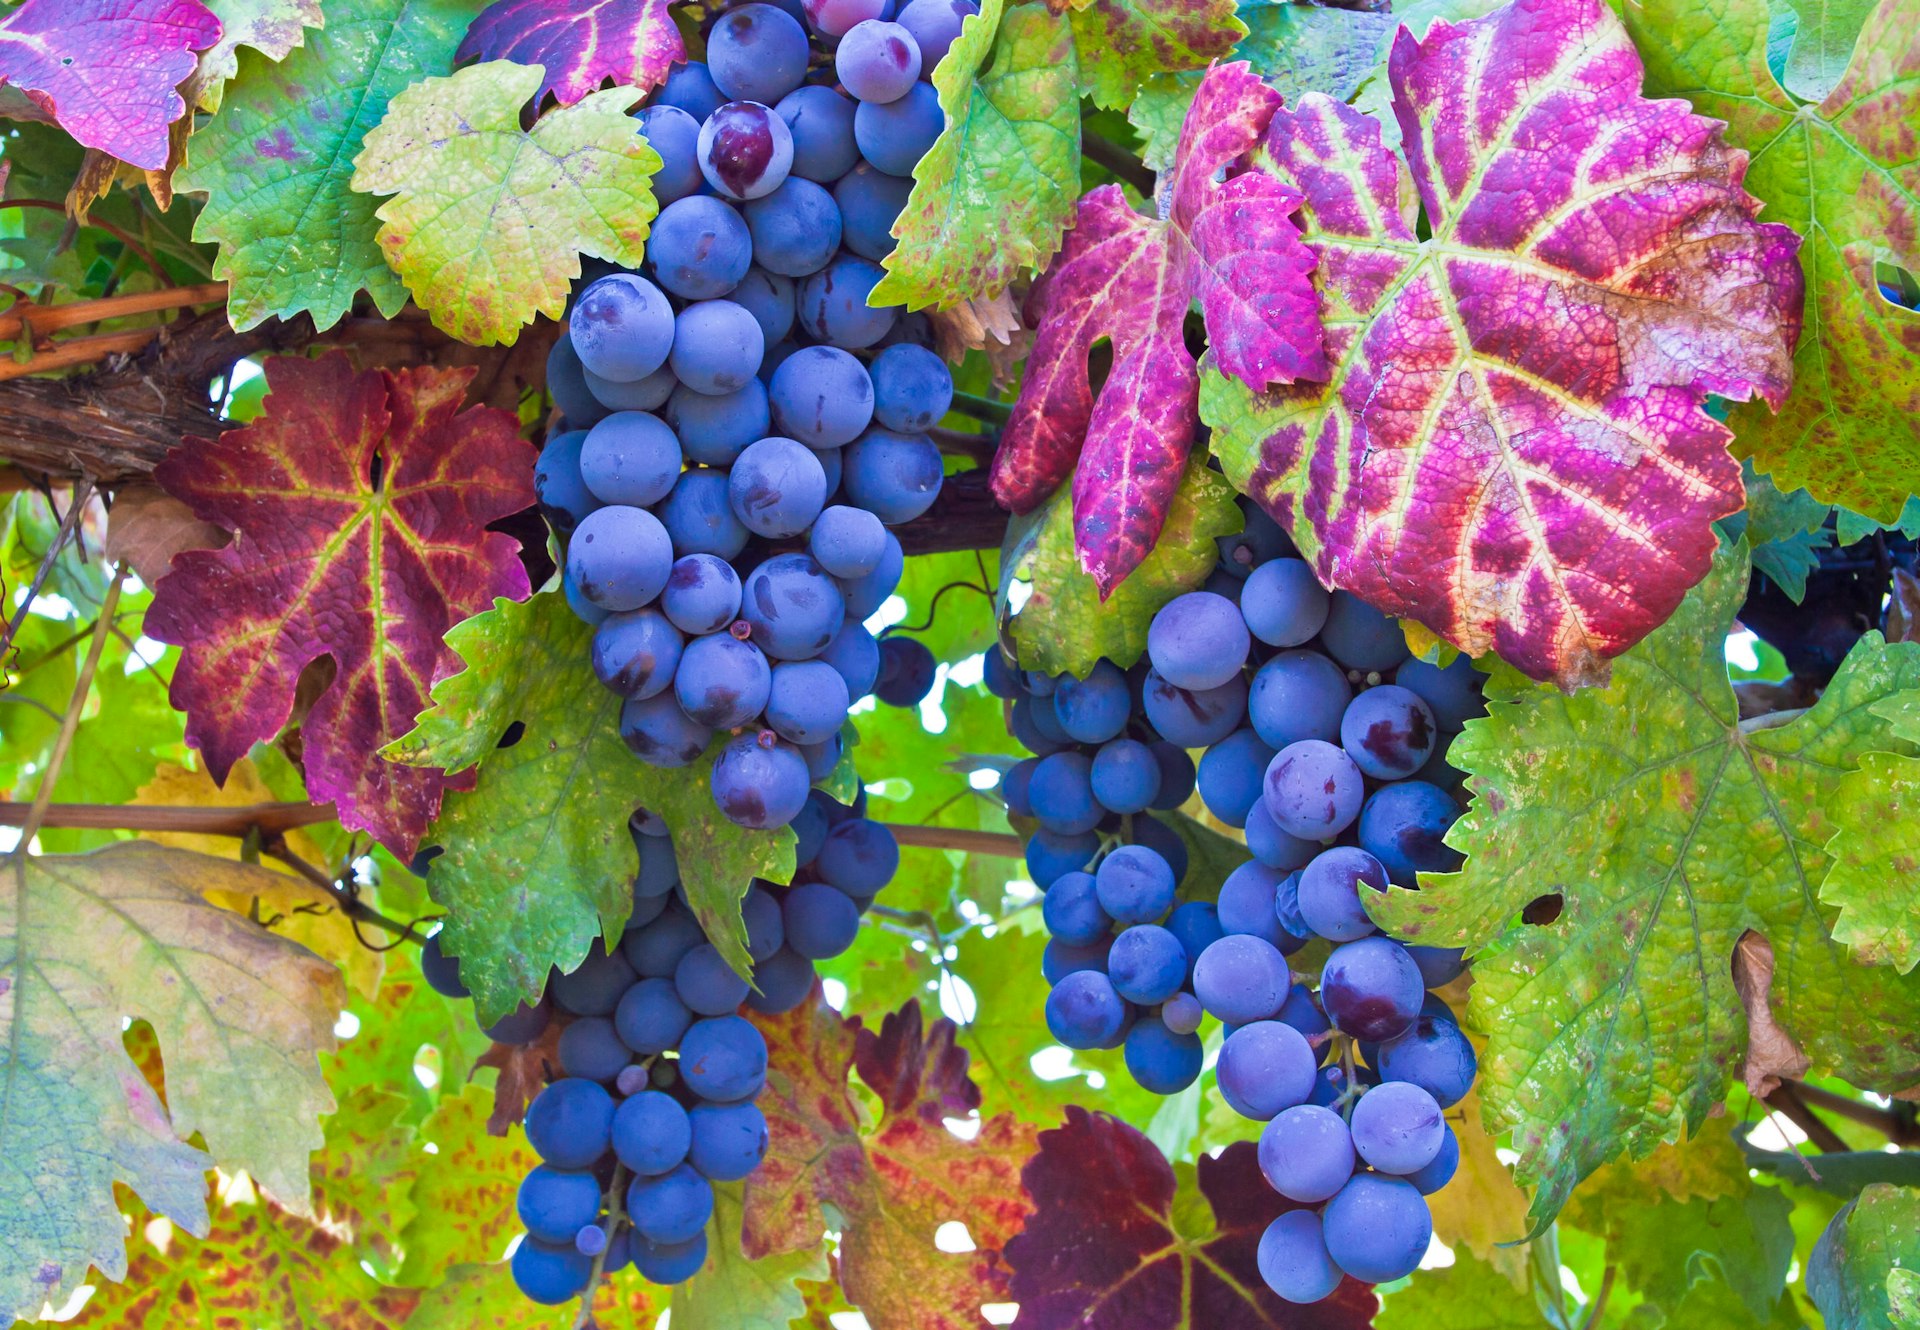 A close-up shot of dark purple grapes on the vine